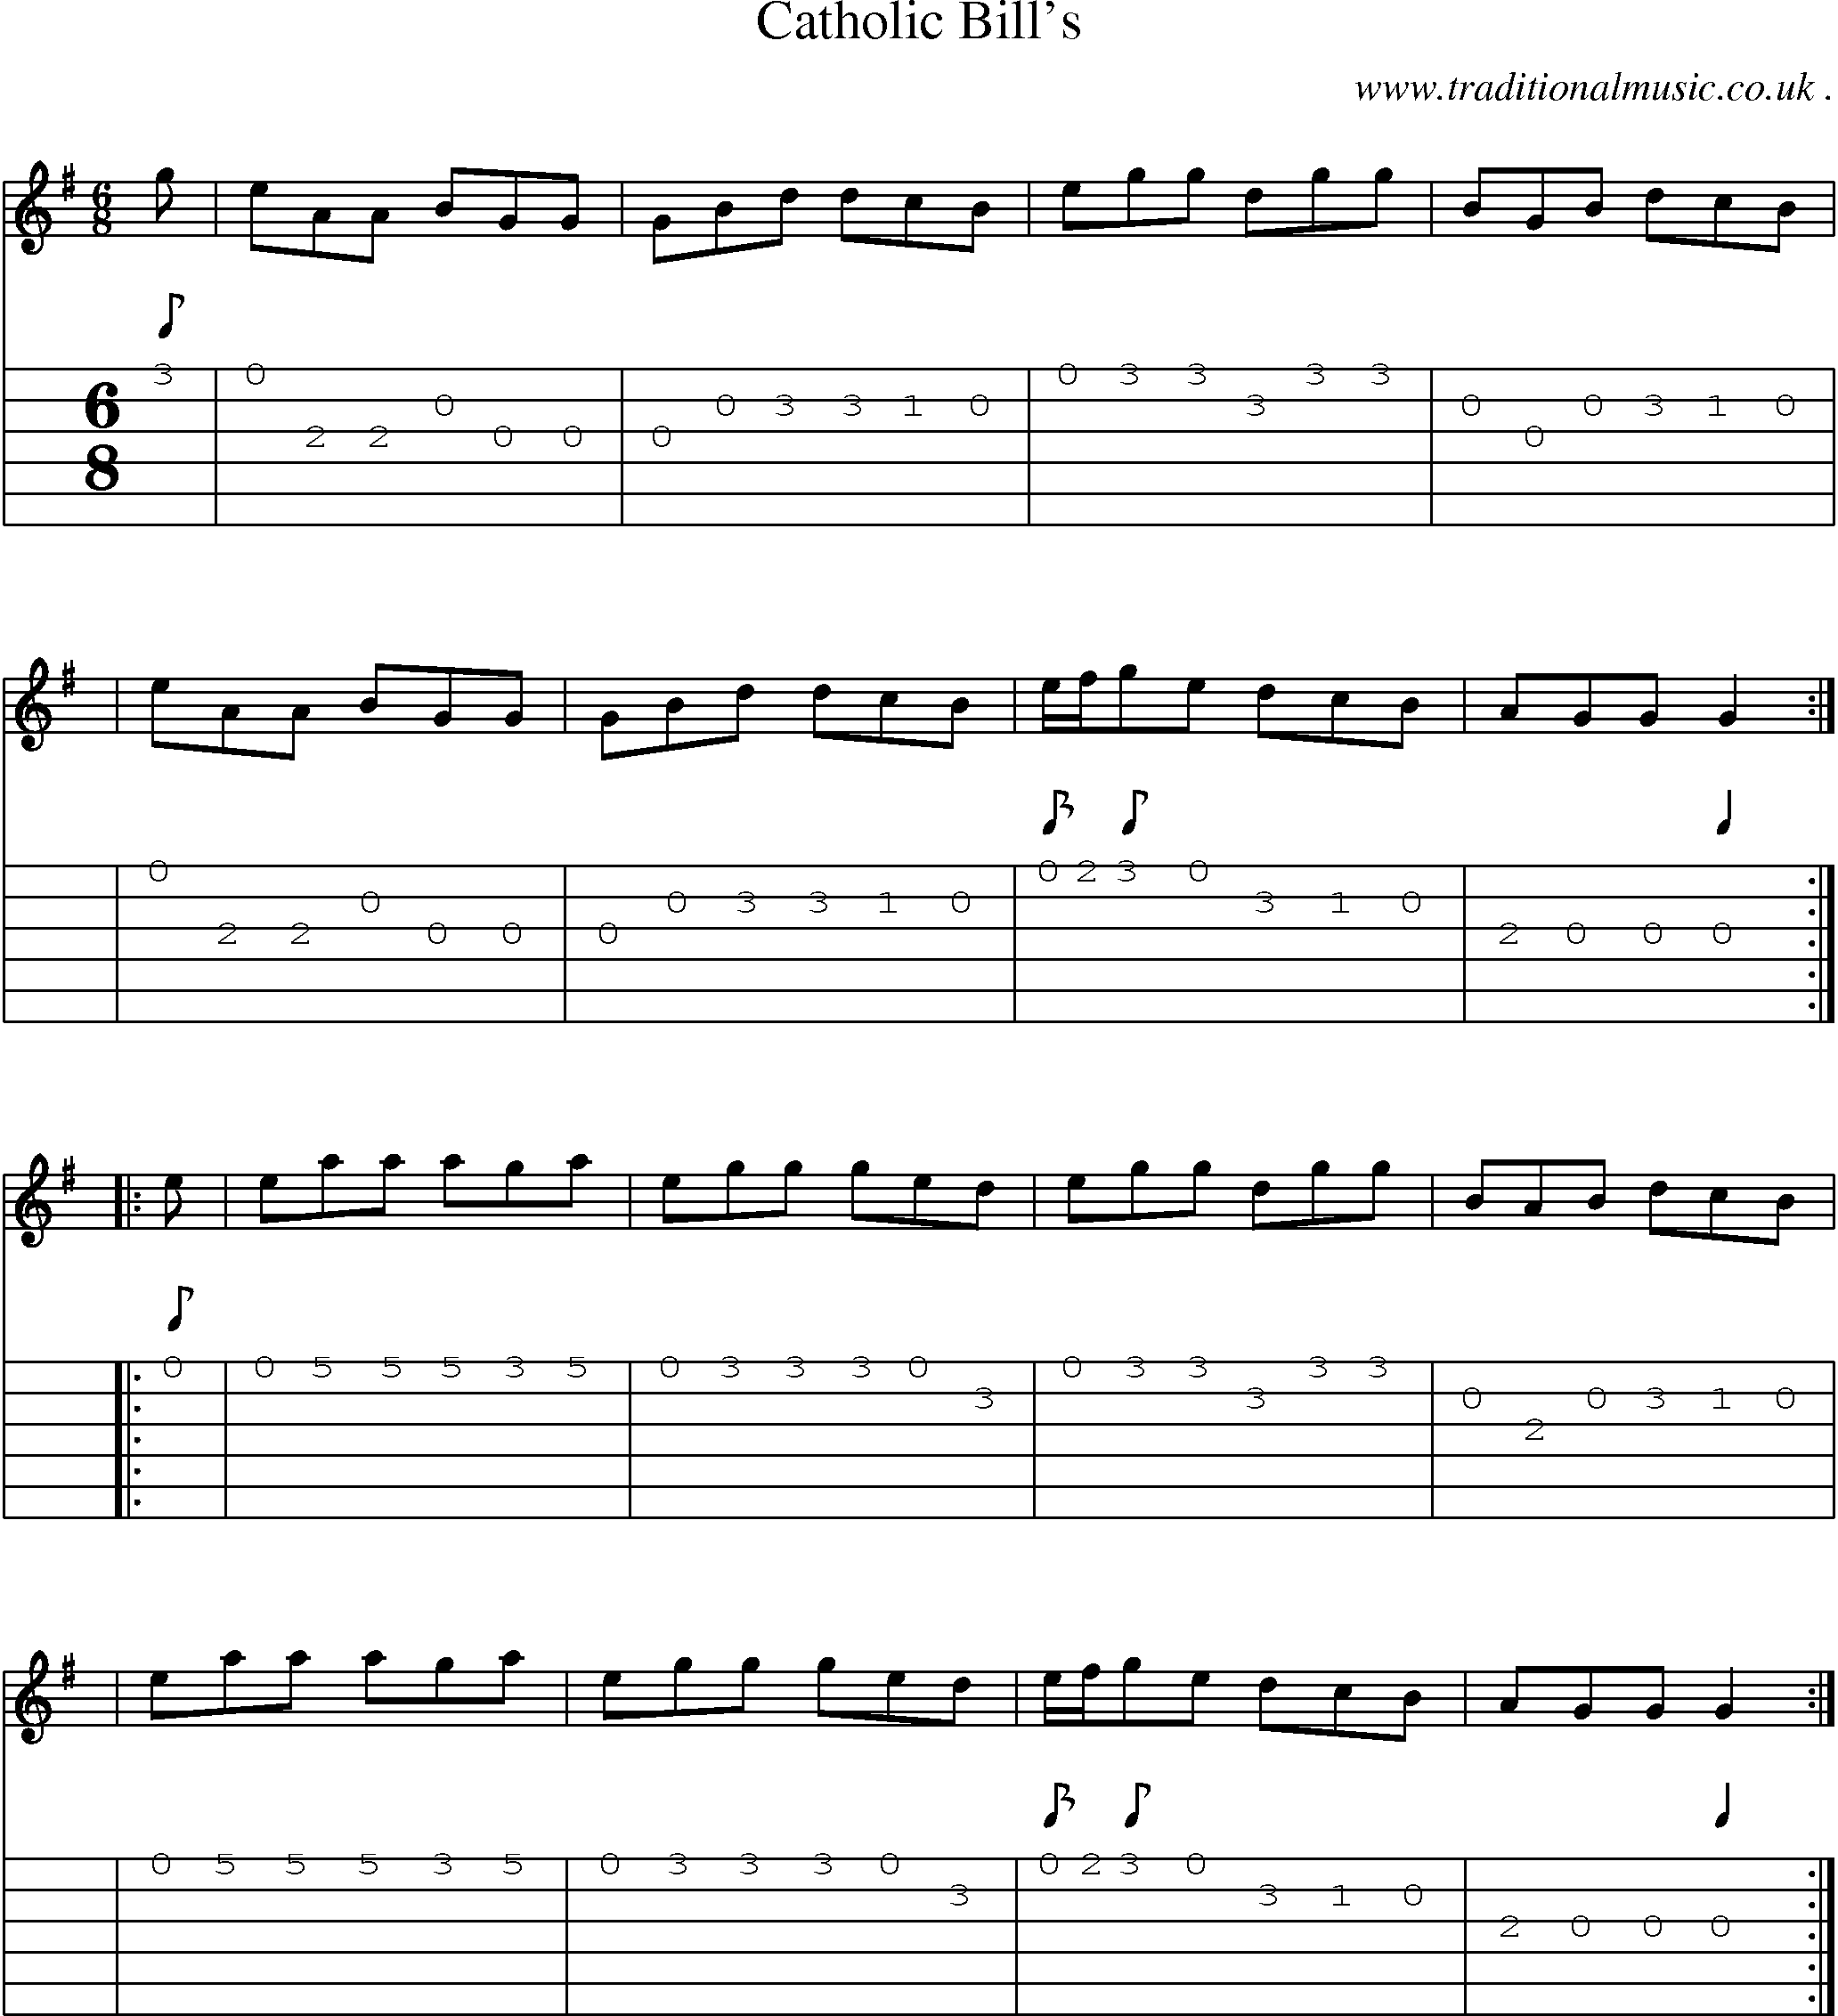 Sheet-music  score, Chords and Guitar Tabs for Catholic Bills